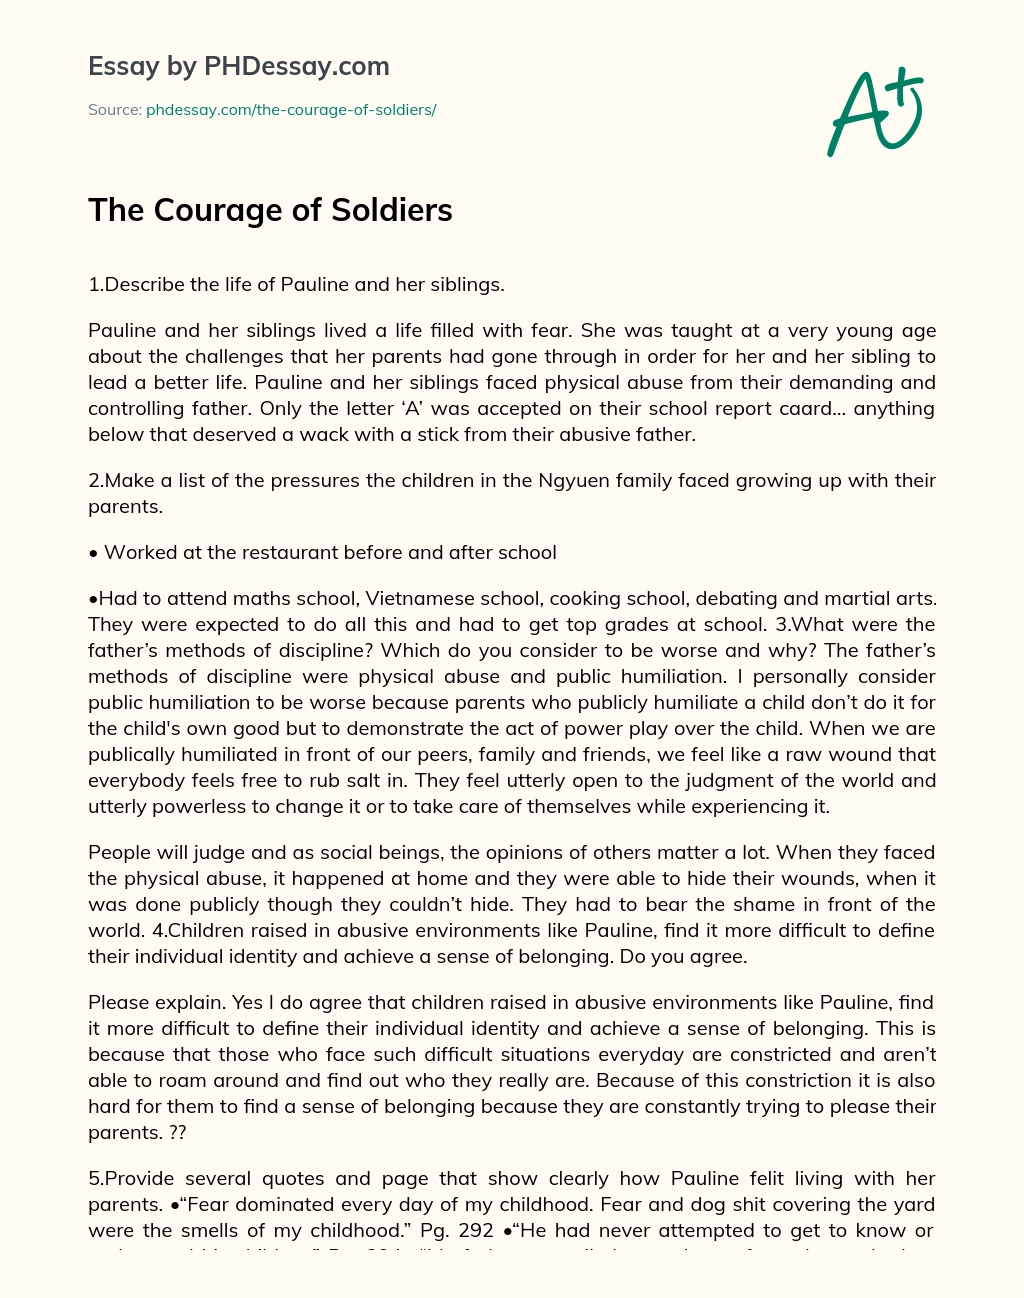 an essay on courage